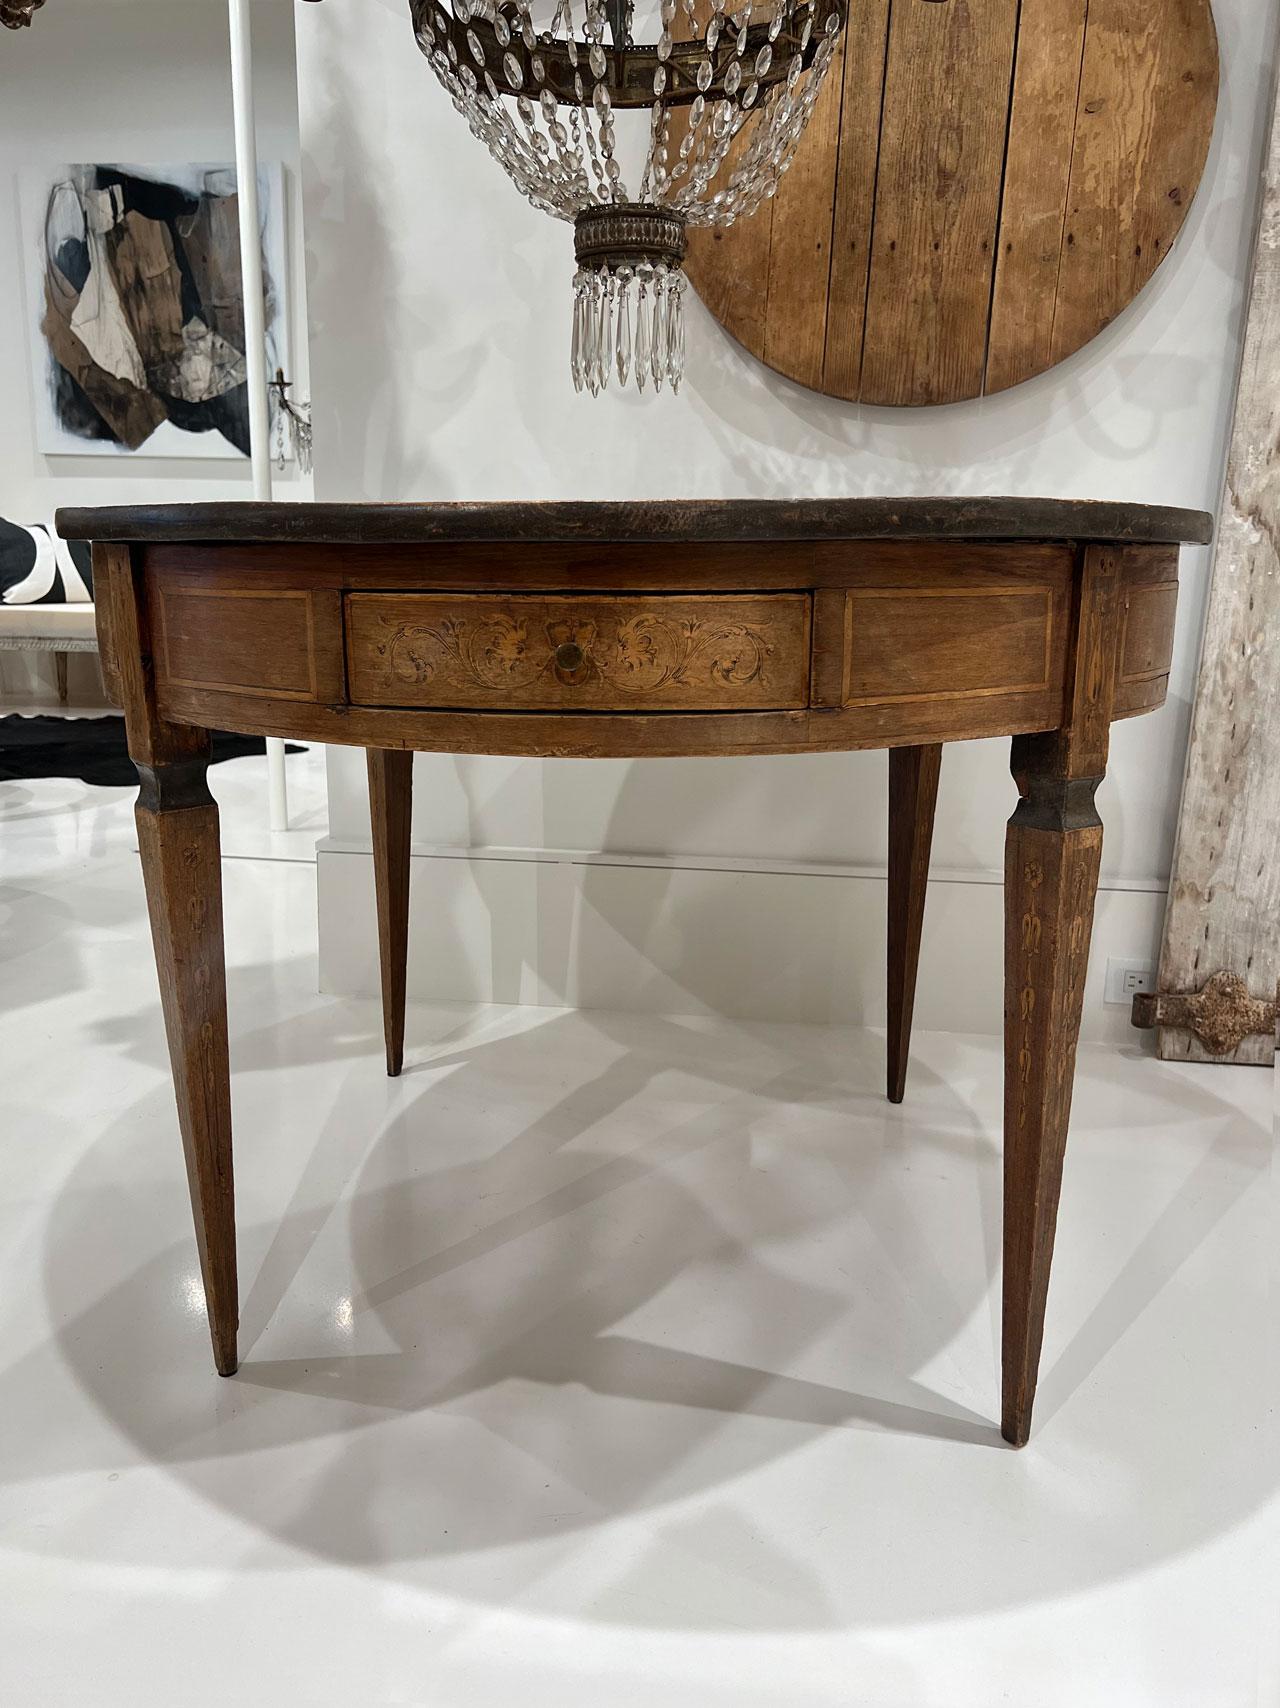 The perfect table for an entry foyer or alcove. There are four drawers all around that should be left accessible as they are a good size for stashing small items like keys and pens. The top is done in an intricate wood inlay or marquetry. The table